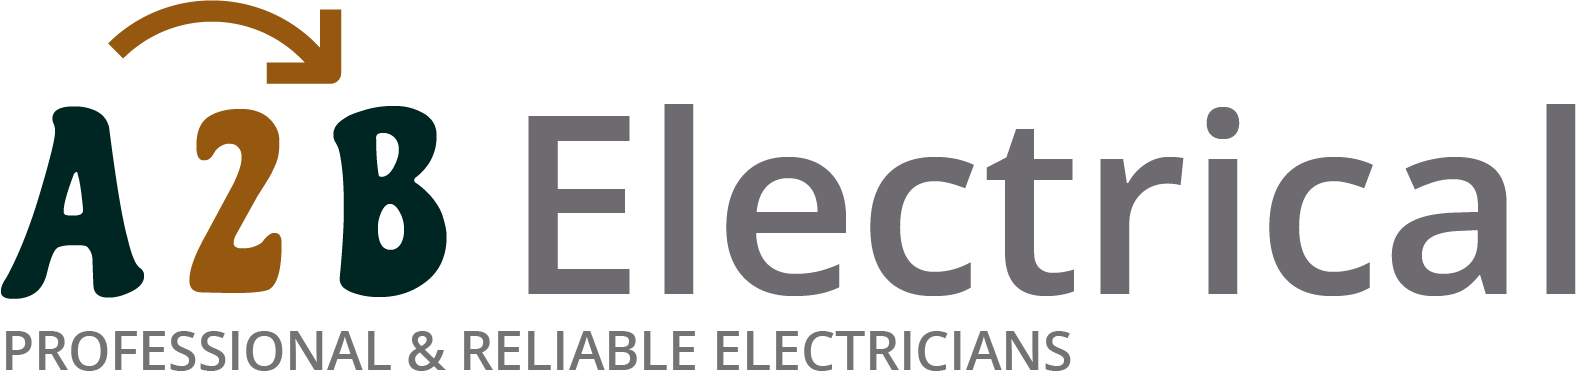 If you have electrical wiring problems in Bishops Stortford, we can provide an electrician to have a look for you. 